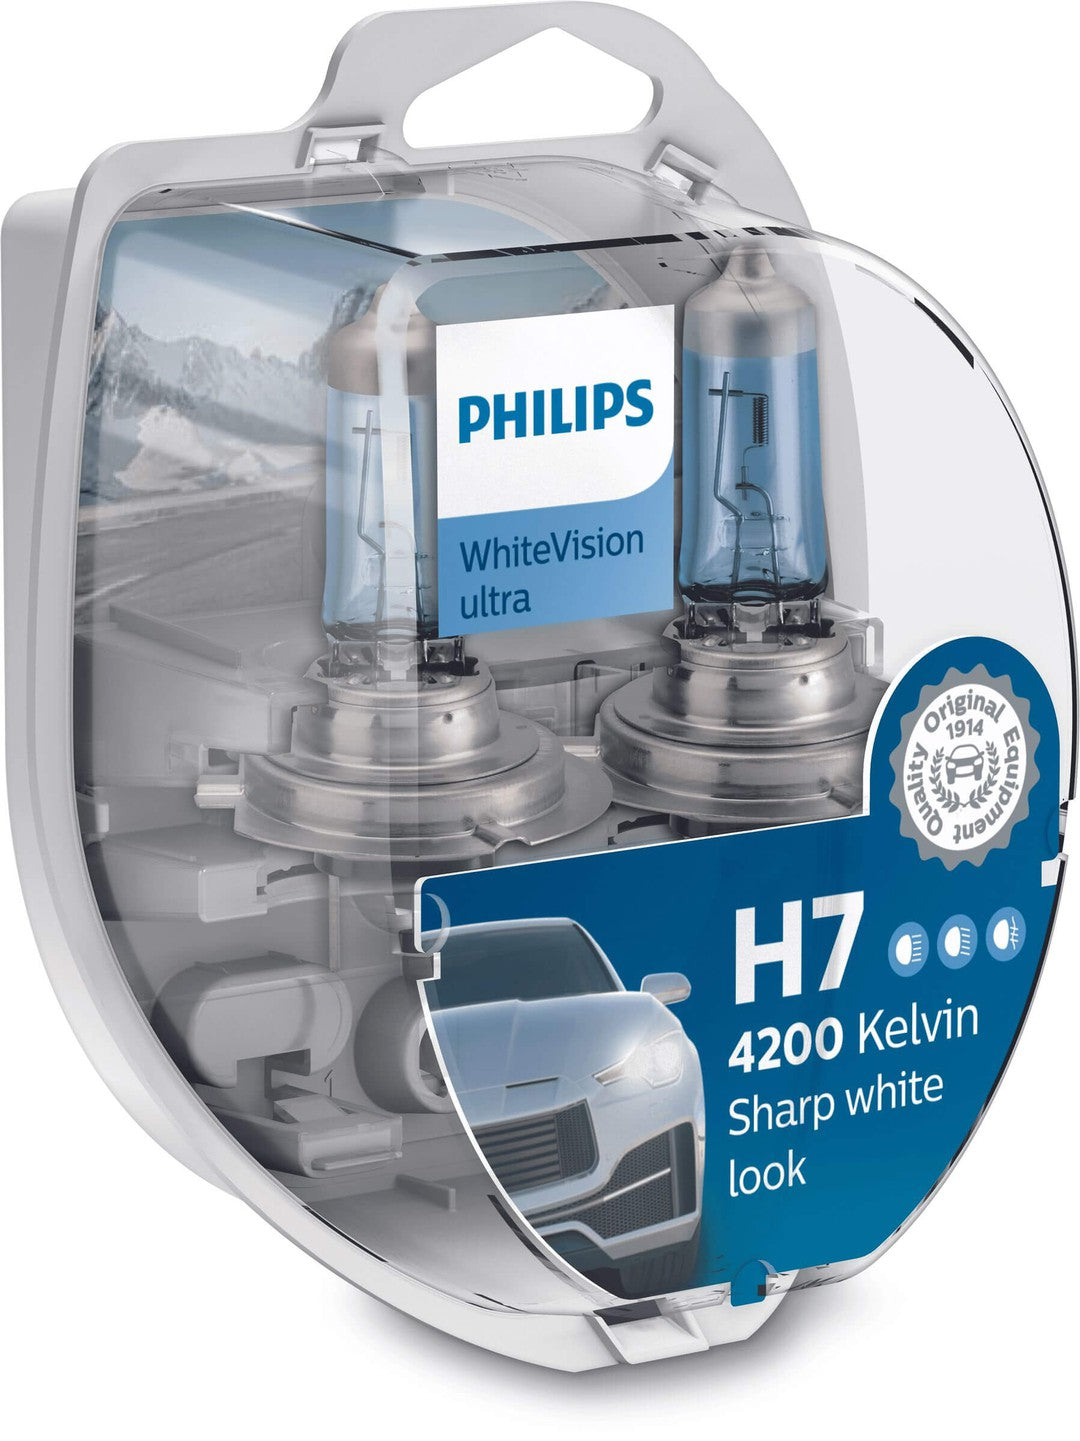 Philips 12972WVUSM H7 forlygter WhiteVision ultra